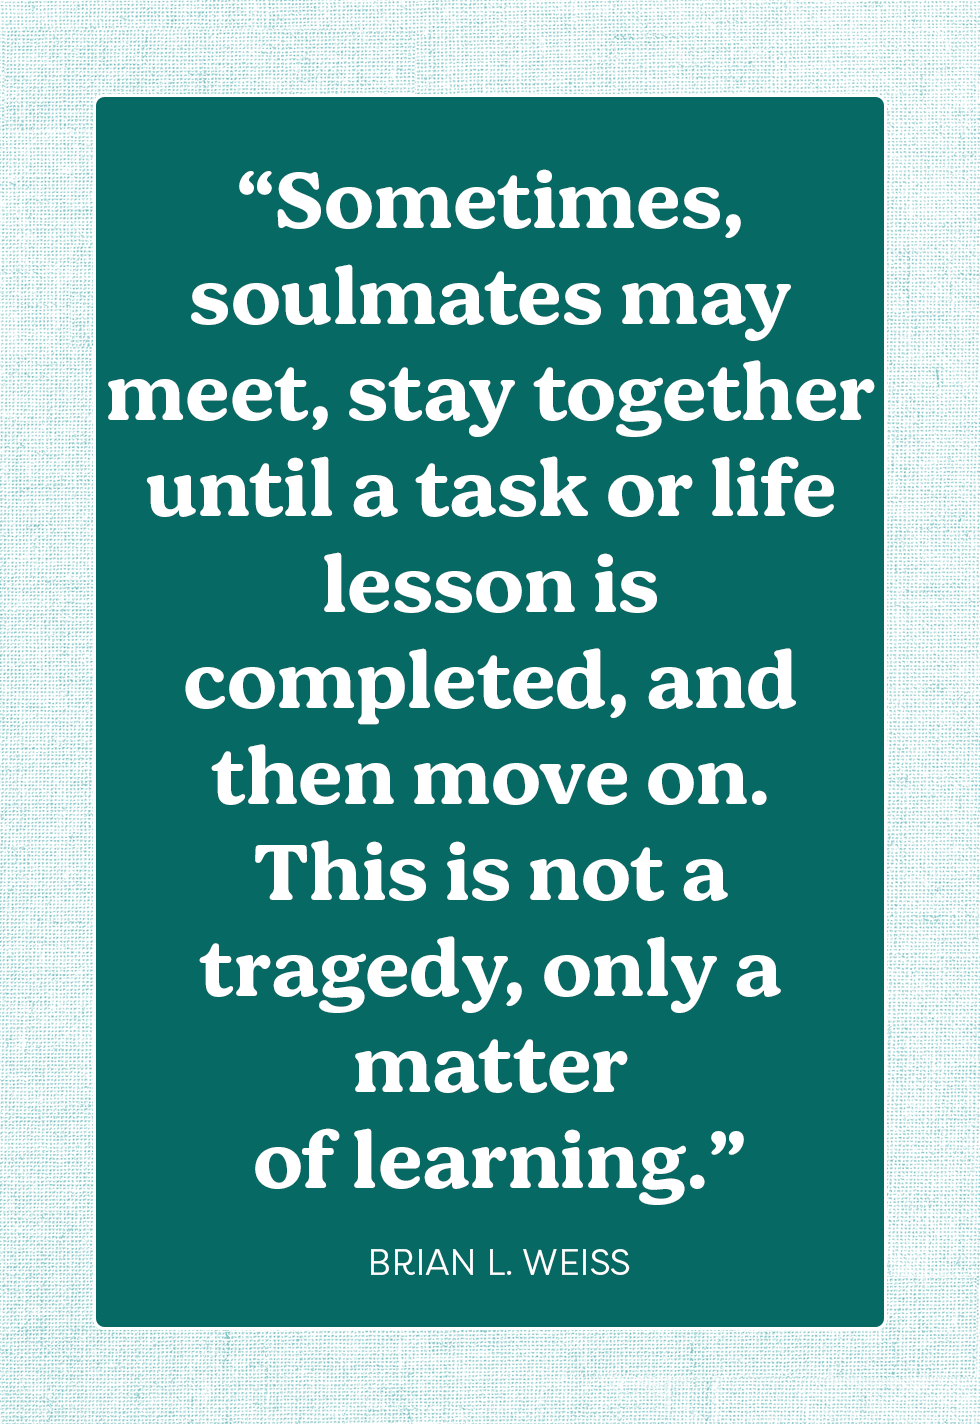 My Soulmate Quotes For Him: Sometimes, Soulmates May Meet, Stay Together Until A